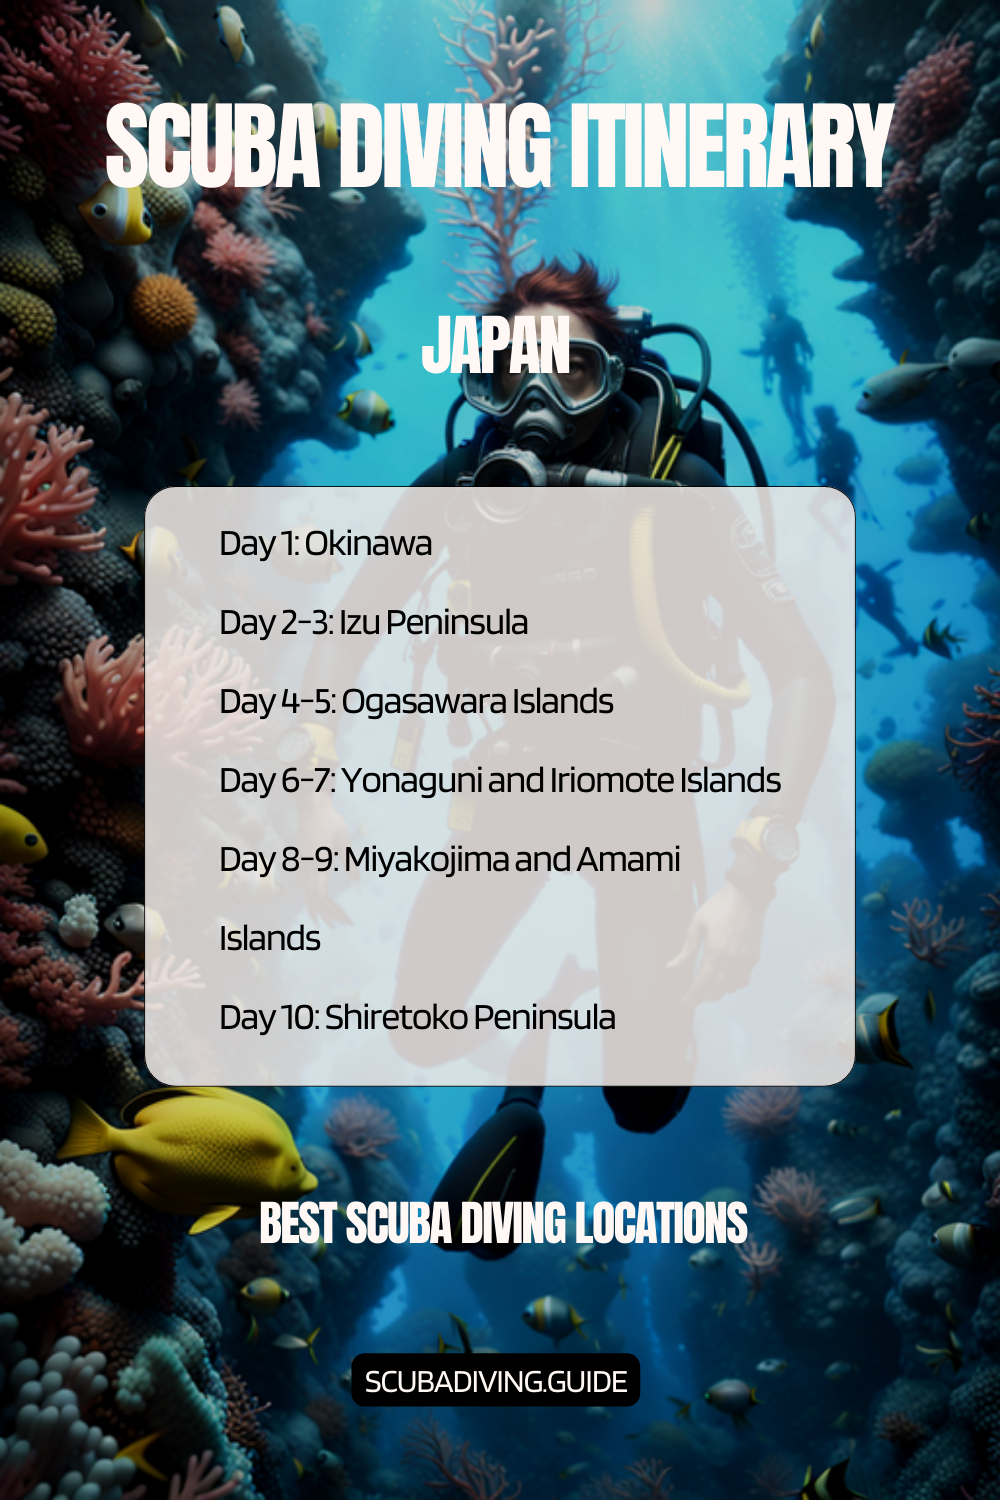 Japan Recommended Scuba Diving Itinerary